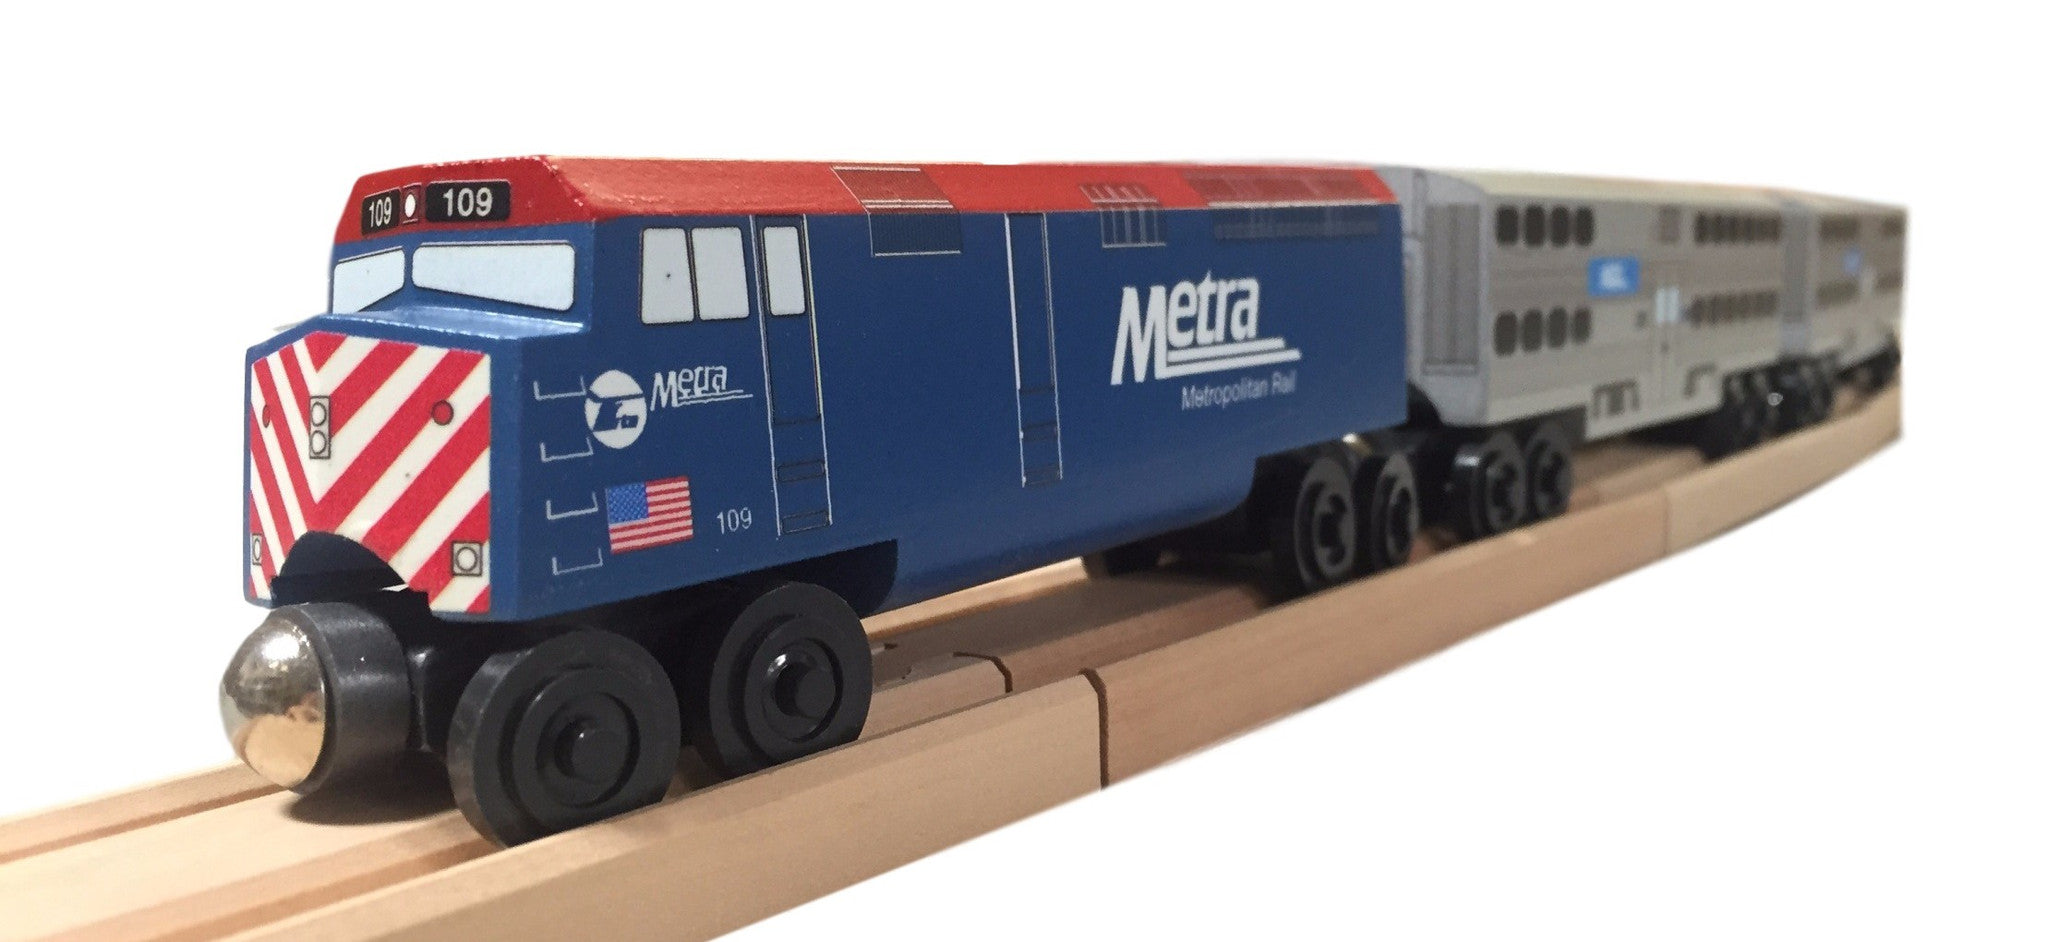 Whittle Shortline Railroad Metra F-40 Diesel Engine Wooden Toy Train with other Metra Passenger Cars